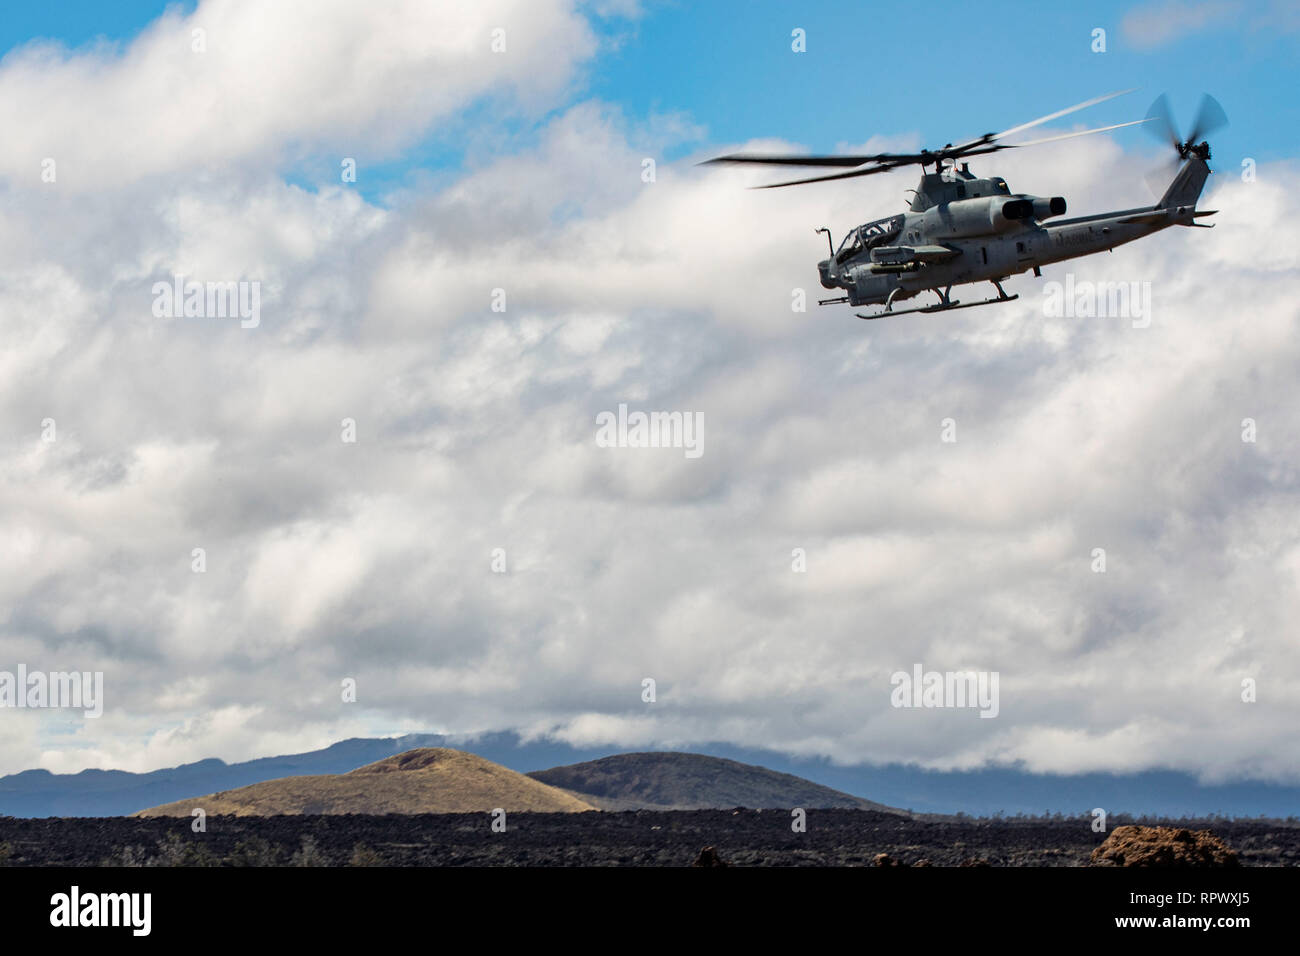 A U.S. Marine Corps AH-1Z Viper helicopter assigned to Marine Light Attack Helicopter Squadron (HMLA) 367, lifts off during a live fire exercise at Pohakuloa Training Area (PTA), Hawaii, Feb. 21, 2019. HMLA-367 provided close air support firing missiles and machine guns, as well as working with U.S. Air Force A-10 Thunderbolt II fighter aircraft to improve mission readiness and interoperability. (U.S. Marine Corps photo by Sgt. Jesus Sepulveda Torres) Stock Photo